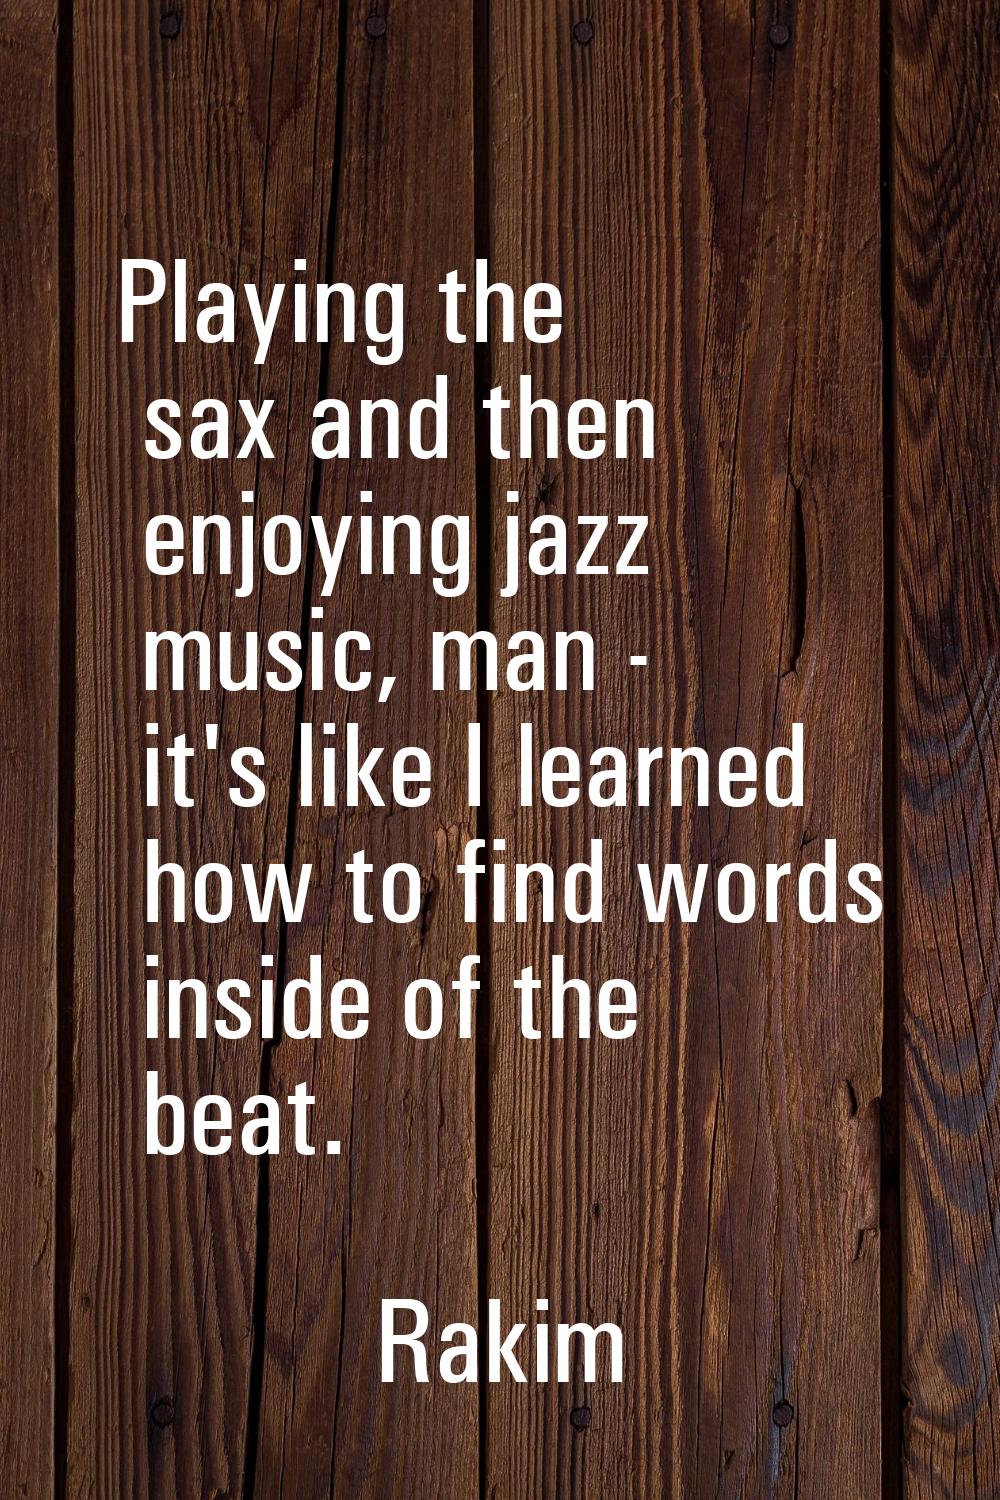 Playing the sax and then enjoying jazz music, man - it's like I learned how to find words inside of